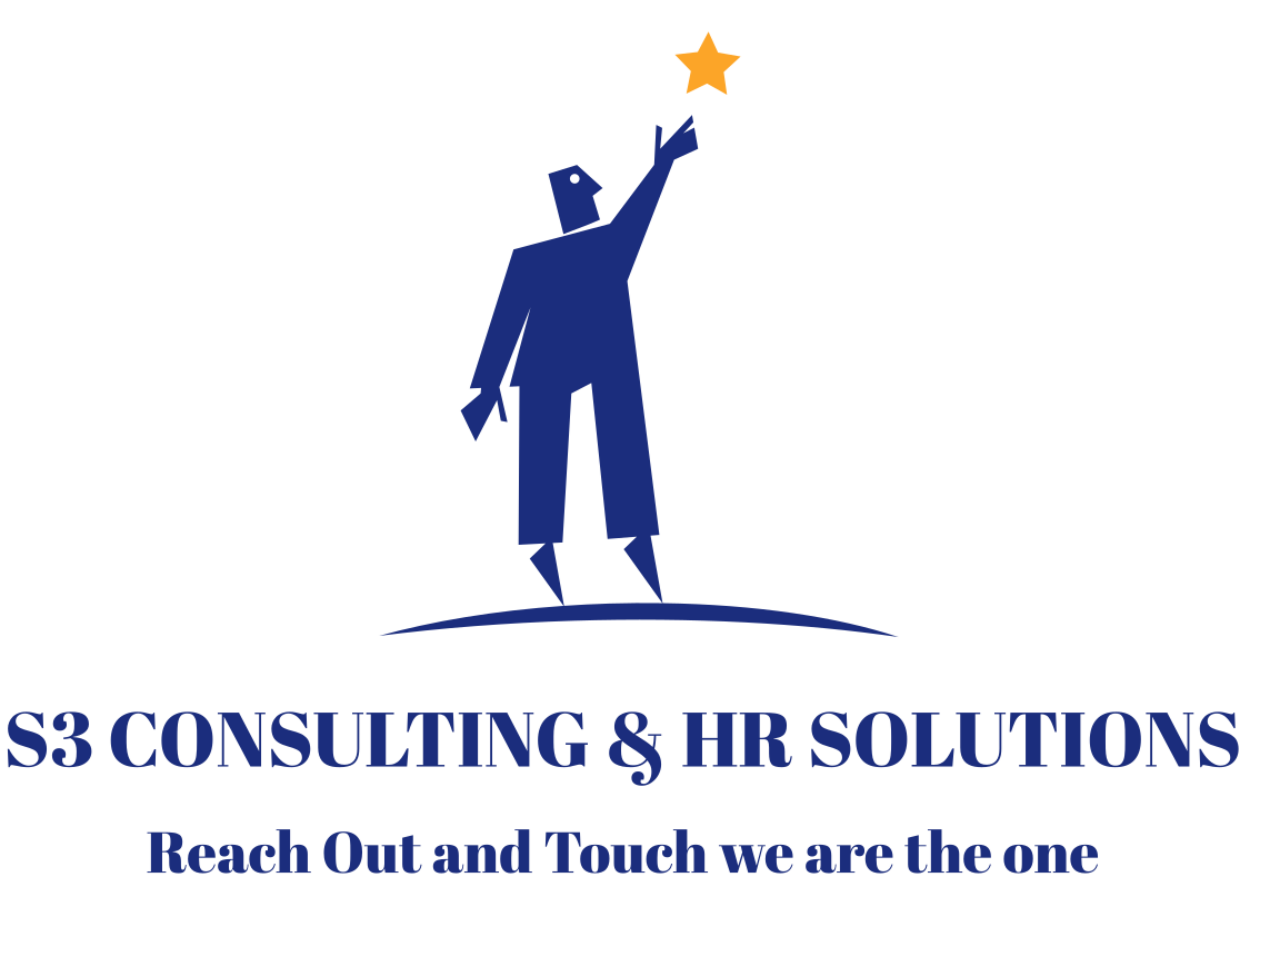 S3 CONSULTING & HR SOLUTIONS's web page